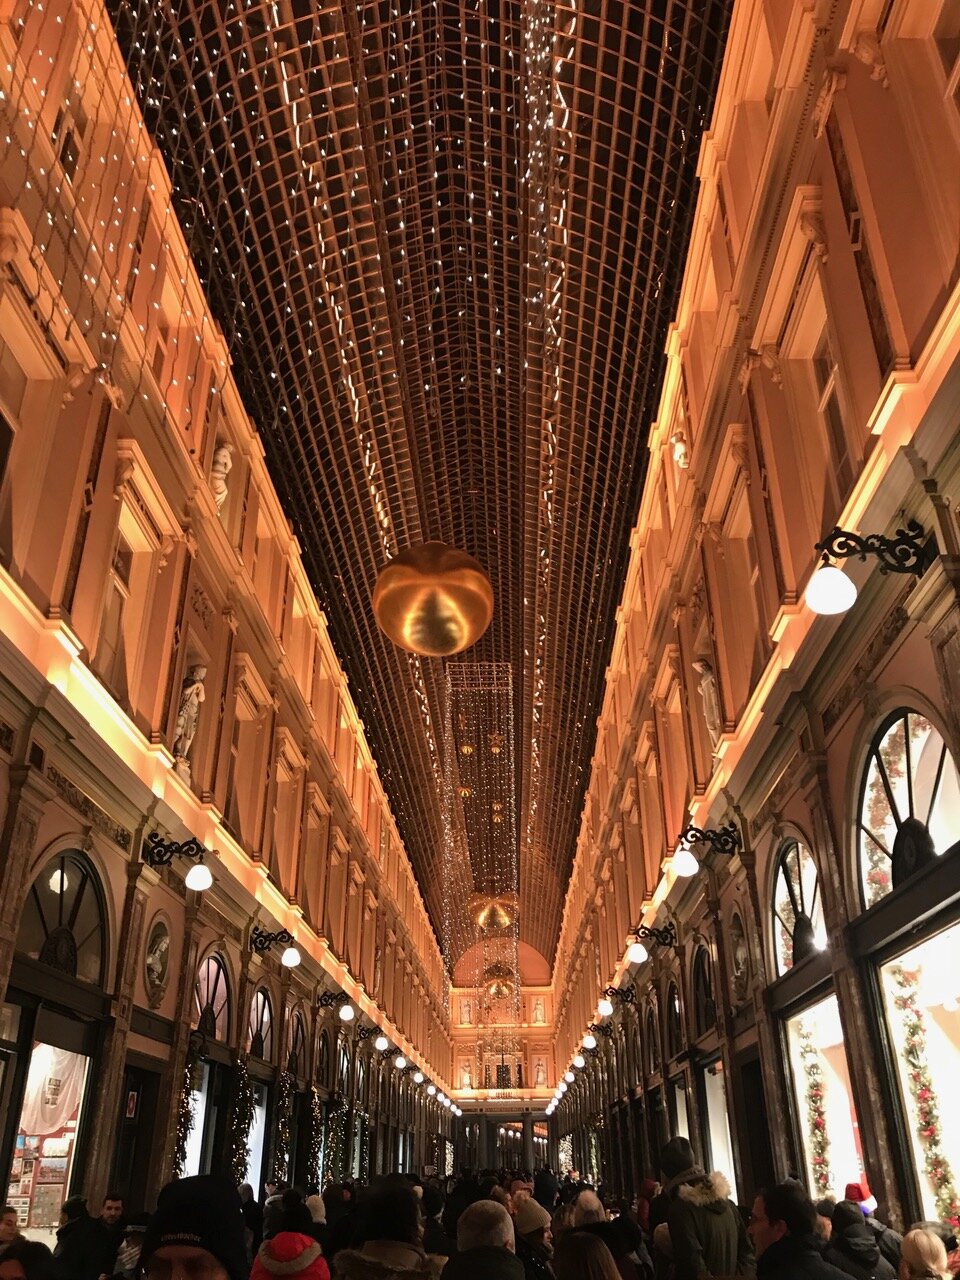 The decorations of the Galeries and the smell of warm chocolate really put you in the Christmas Spirit!